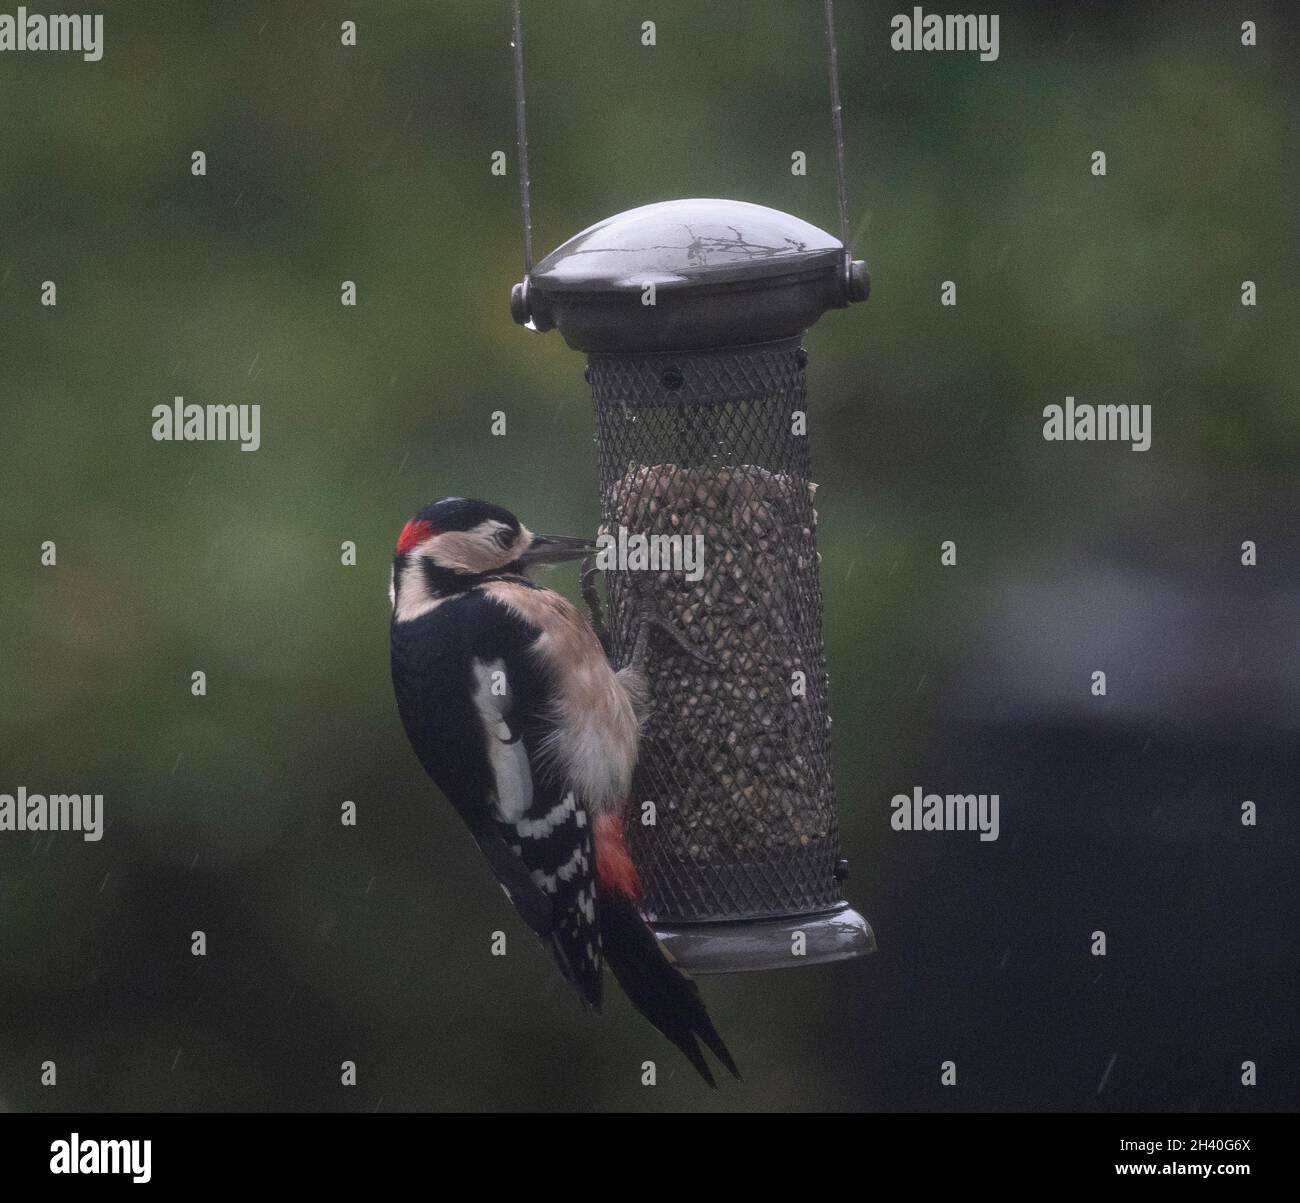 Wimbledon, London, UK. 31 October 2021. A Great Spotted Woodpecker remains undeterred as it feeds from a swinging garden bird feeder in high wind and heavy rain. Credit: Malcolm Park/Alamy Live News Stock Photo